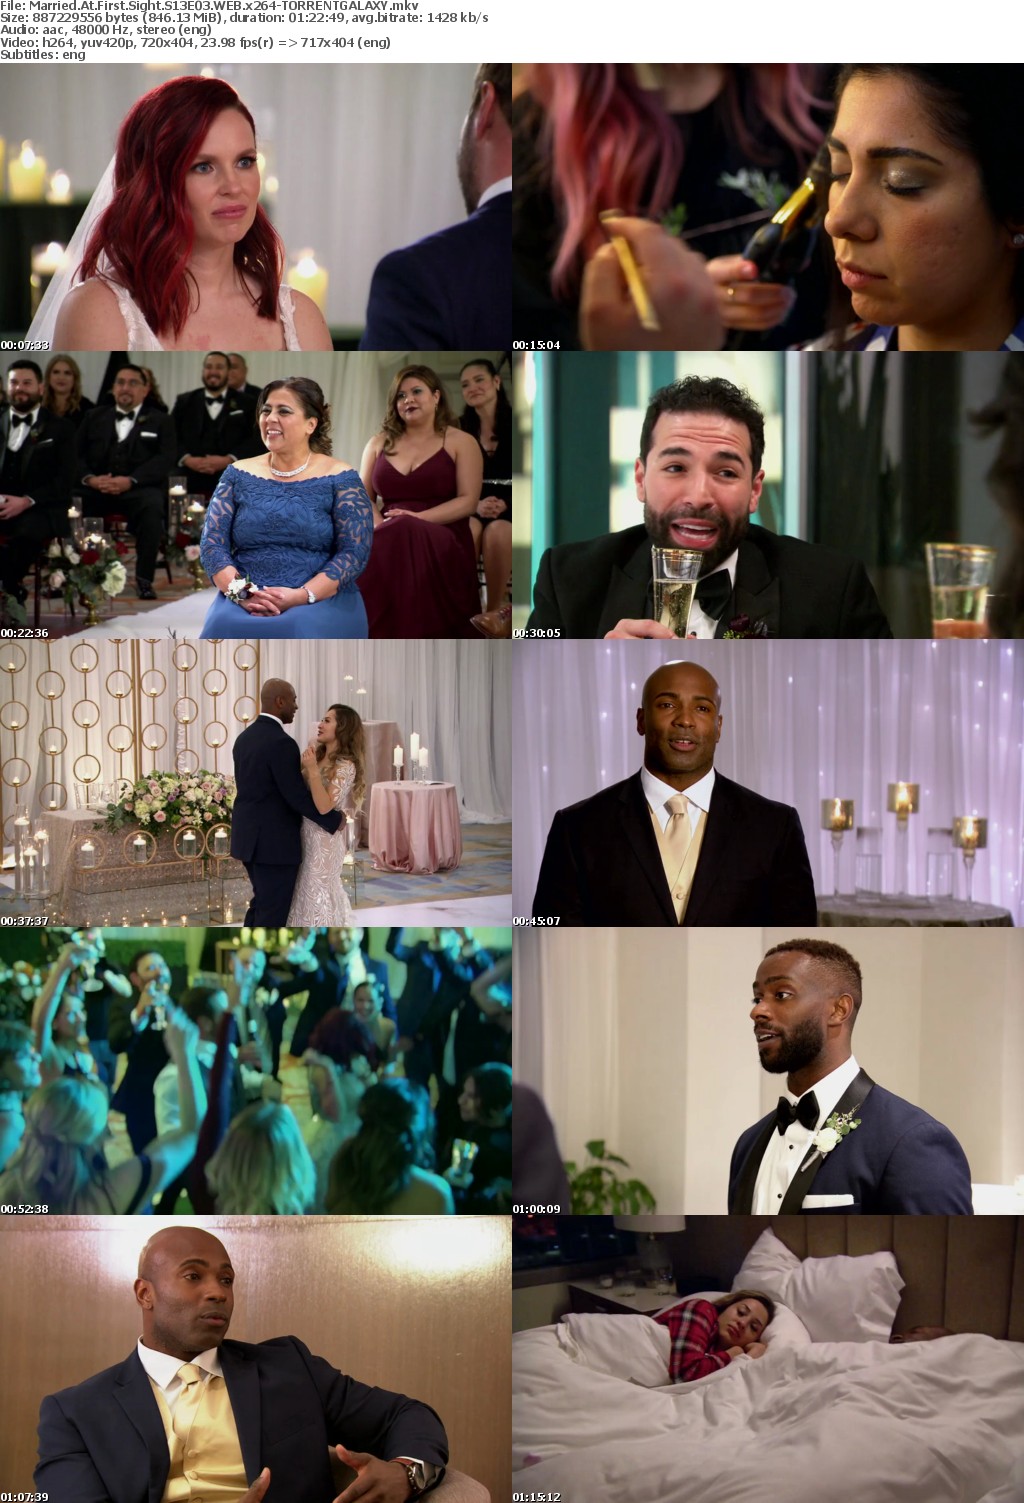 Married At First Sight S13E03 WEB x264-GALAXY